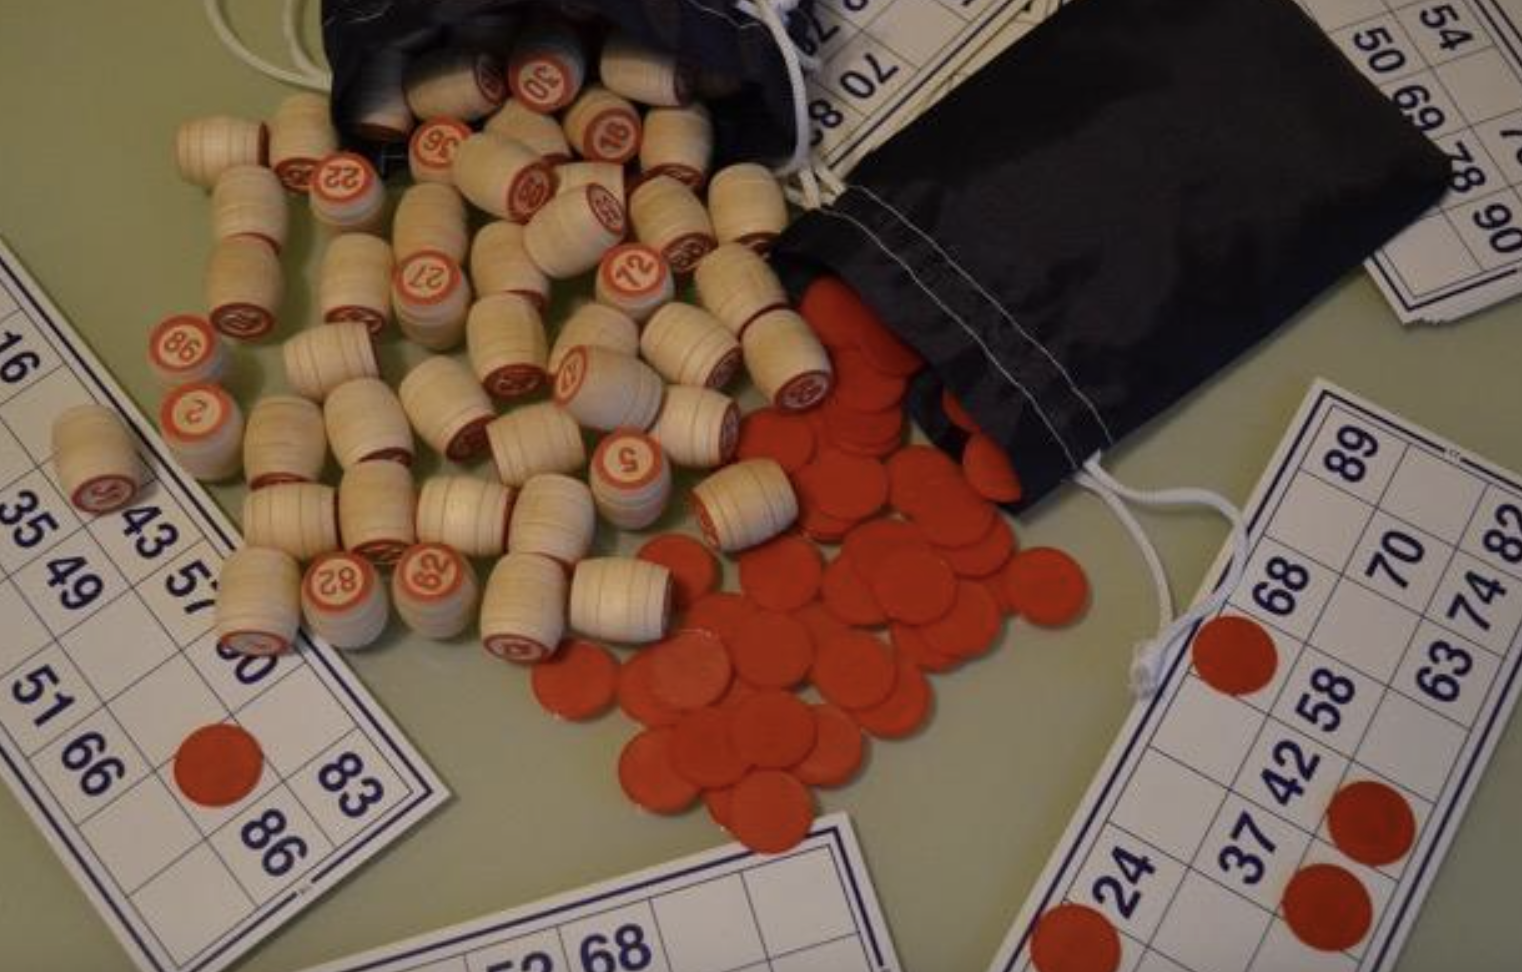 Canada's Growing Bingo Industry - An Economic and Cultural Overview